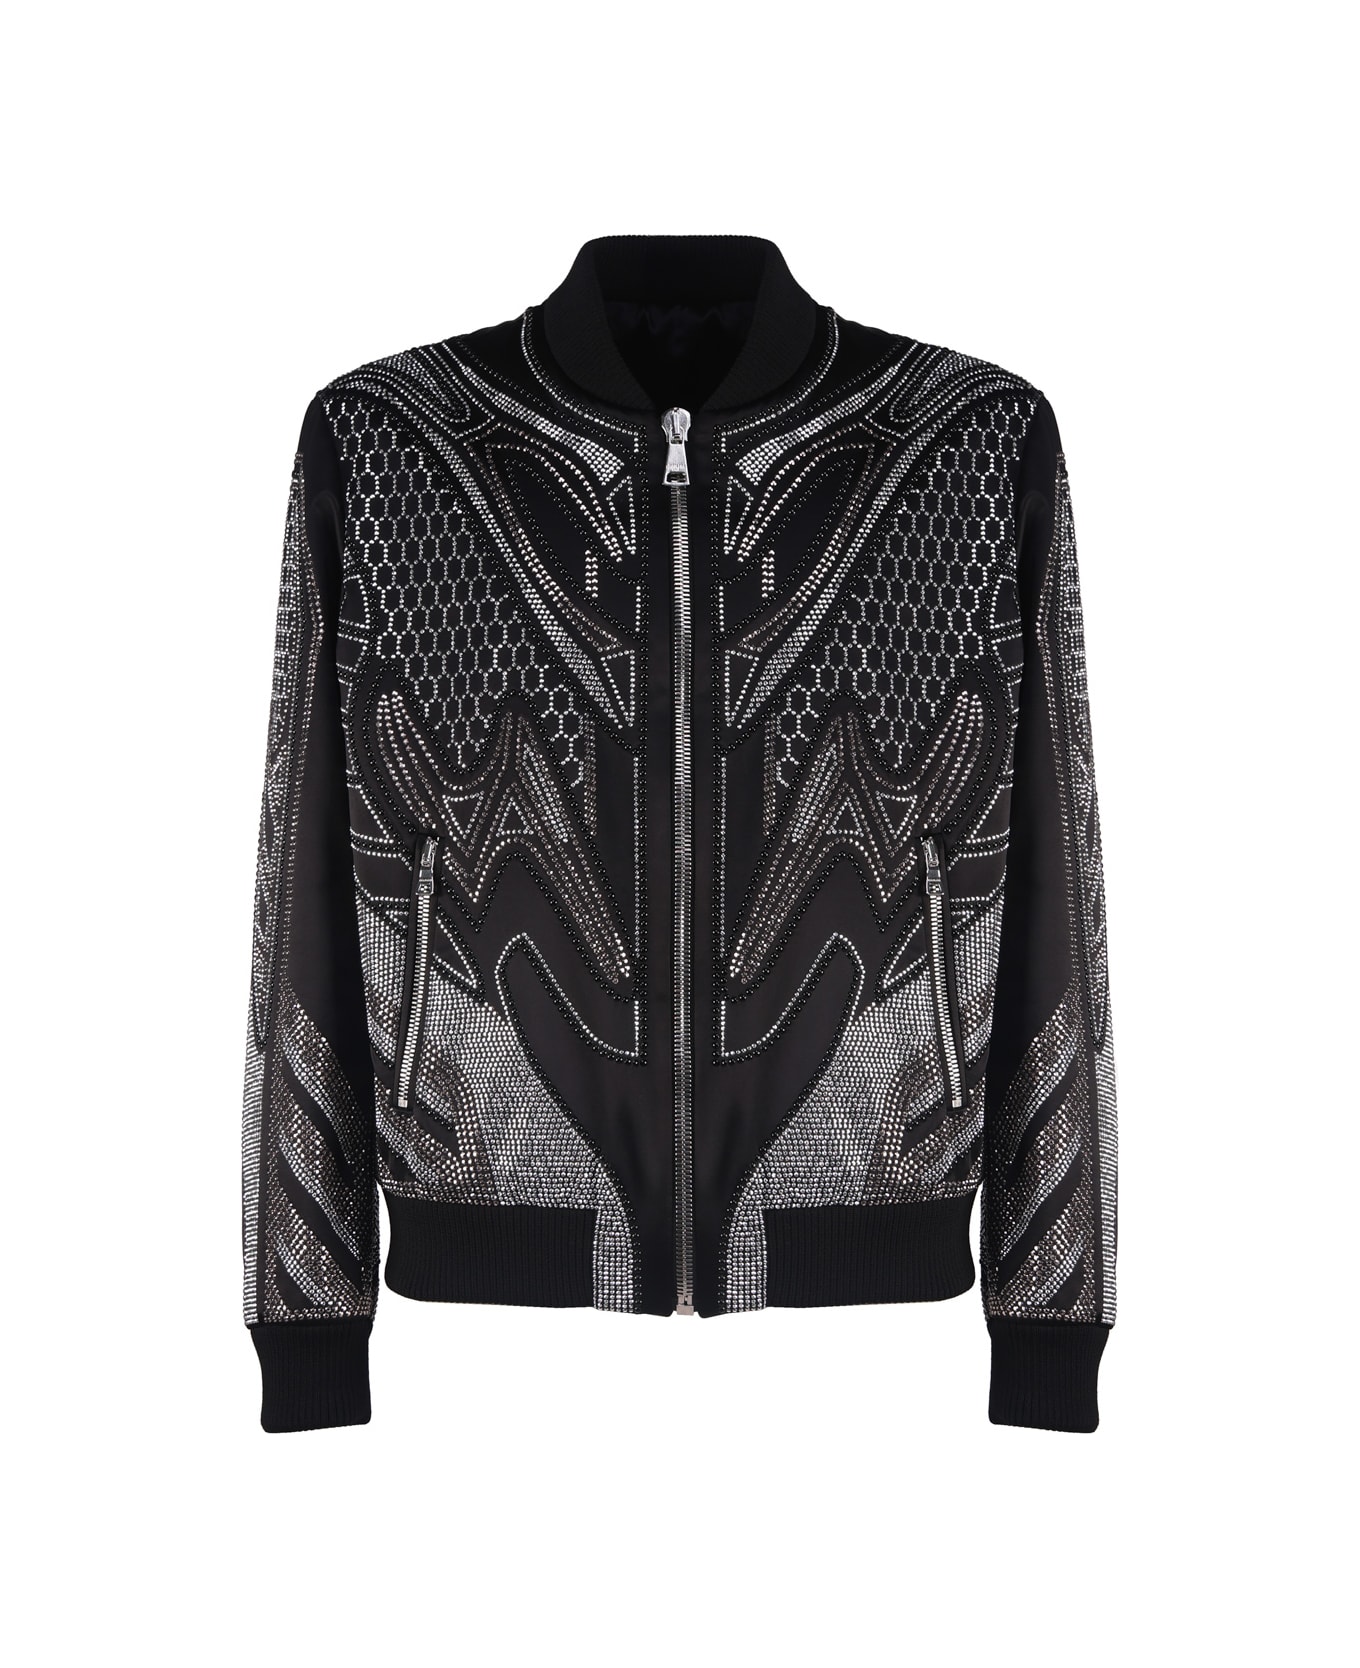 Balmain All-over Embroidered Jacket With Studs - Black